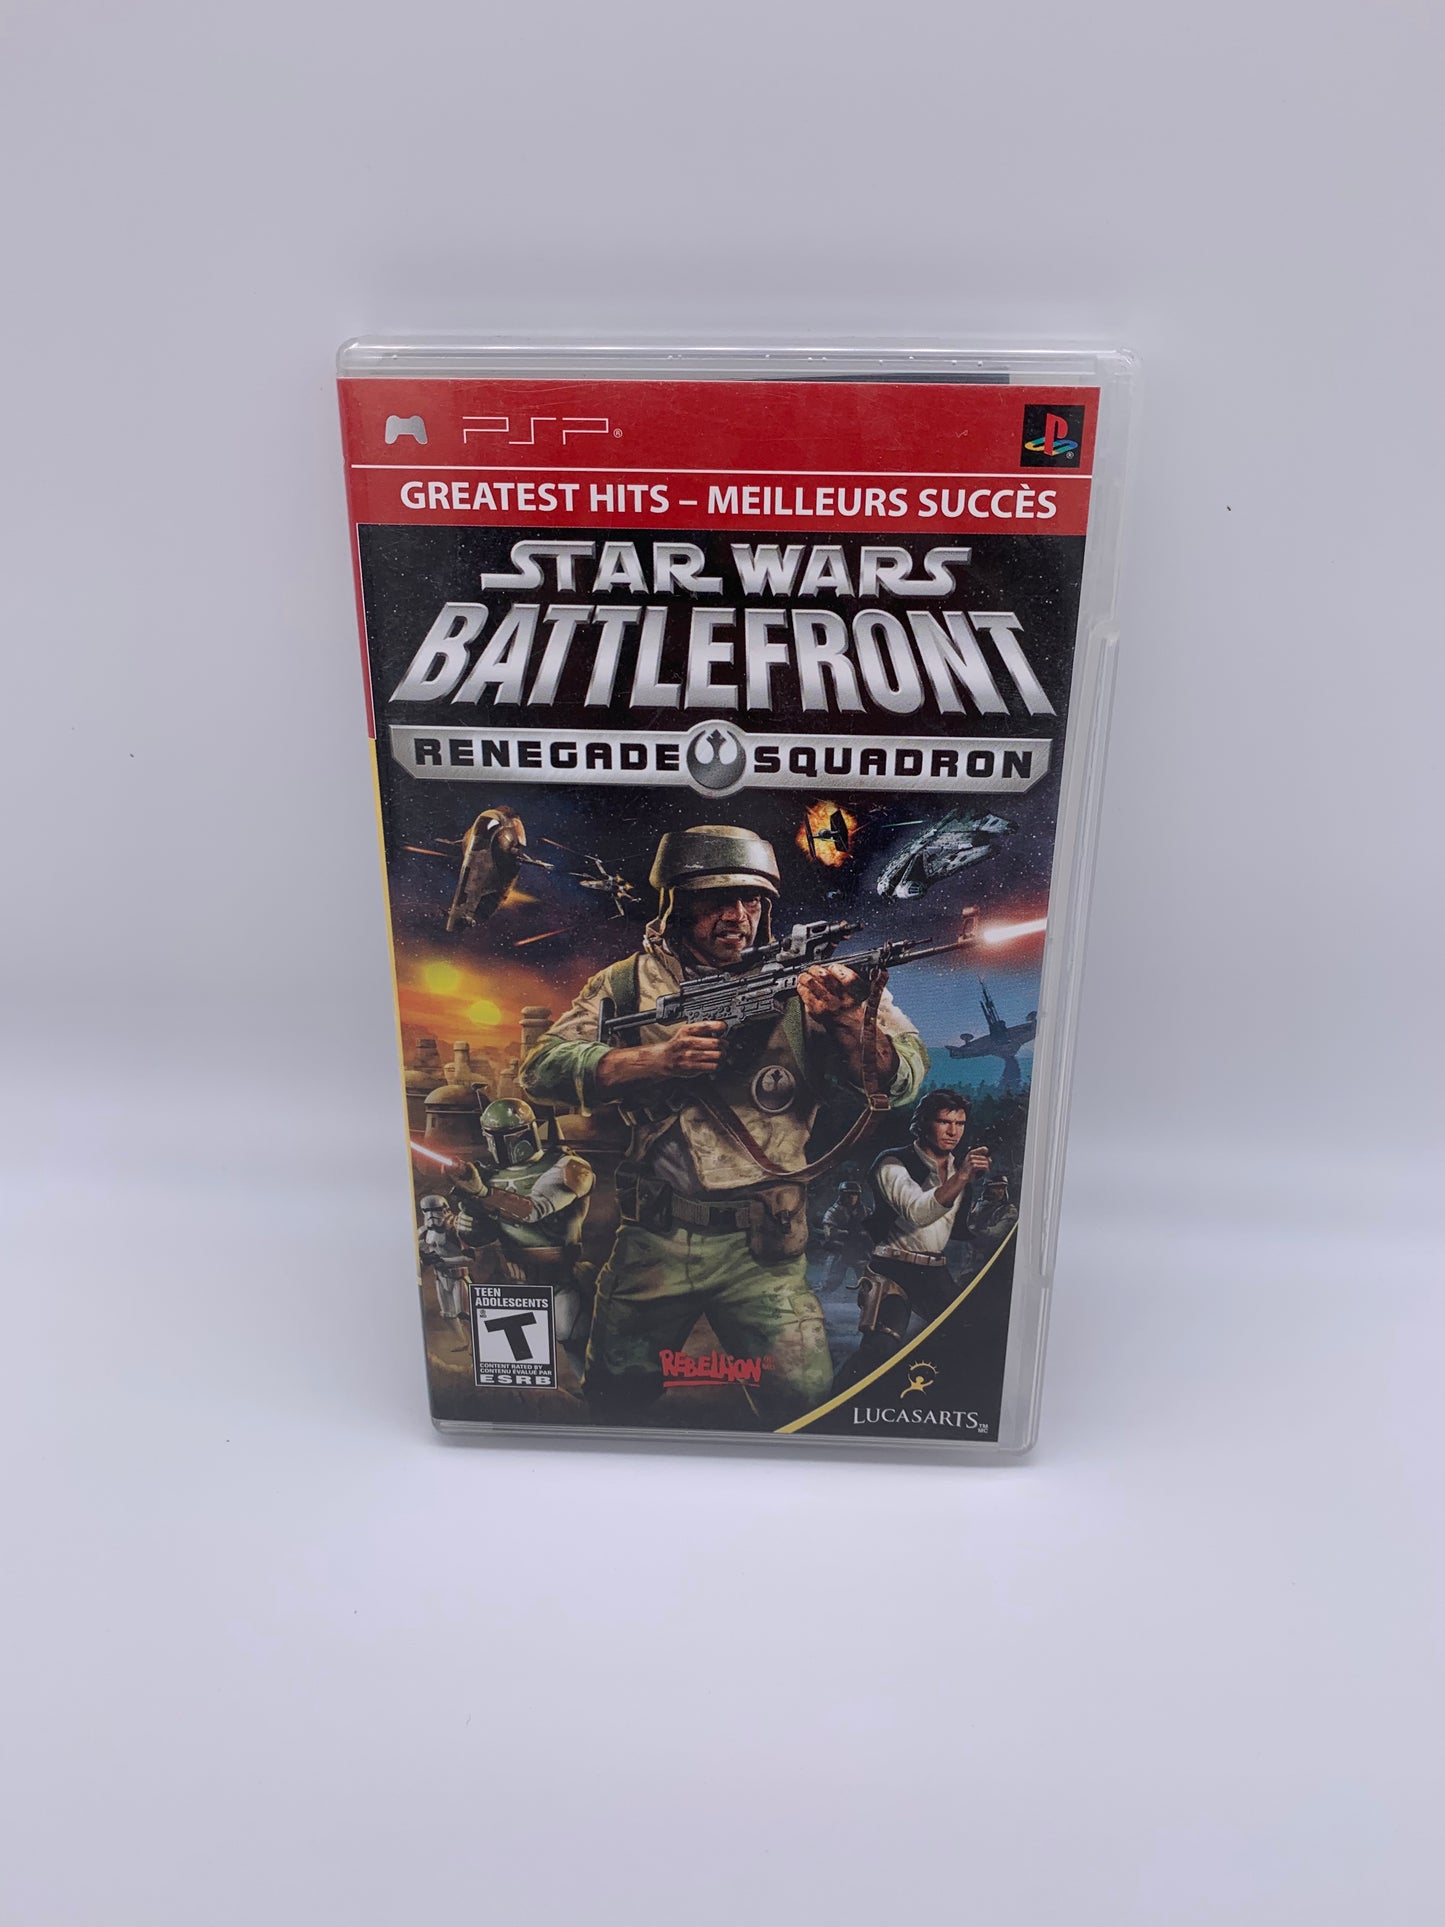 SONY PLAYSTATiON PORTABLE [PSP] | STAR WARS BATTLEFRONT RENEGADE SQUADRON | GREATEST HiTS